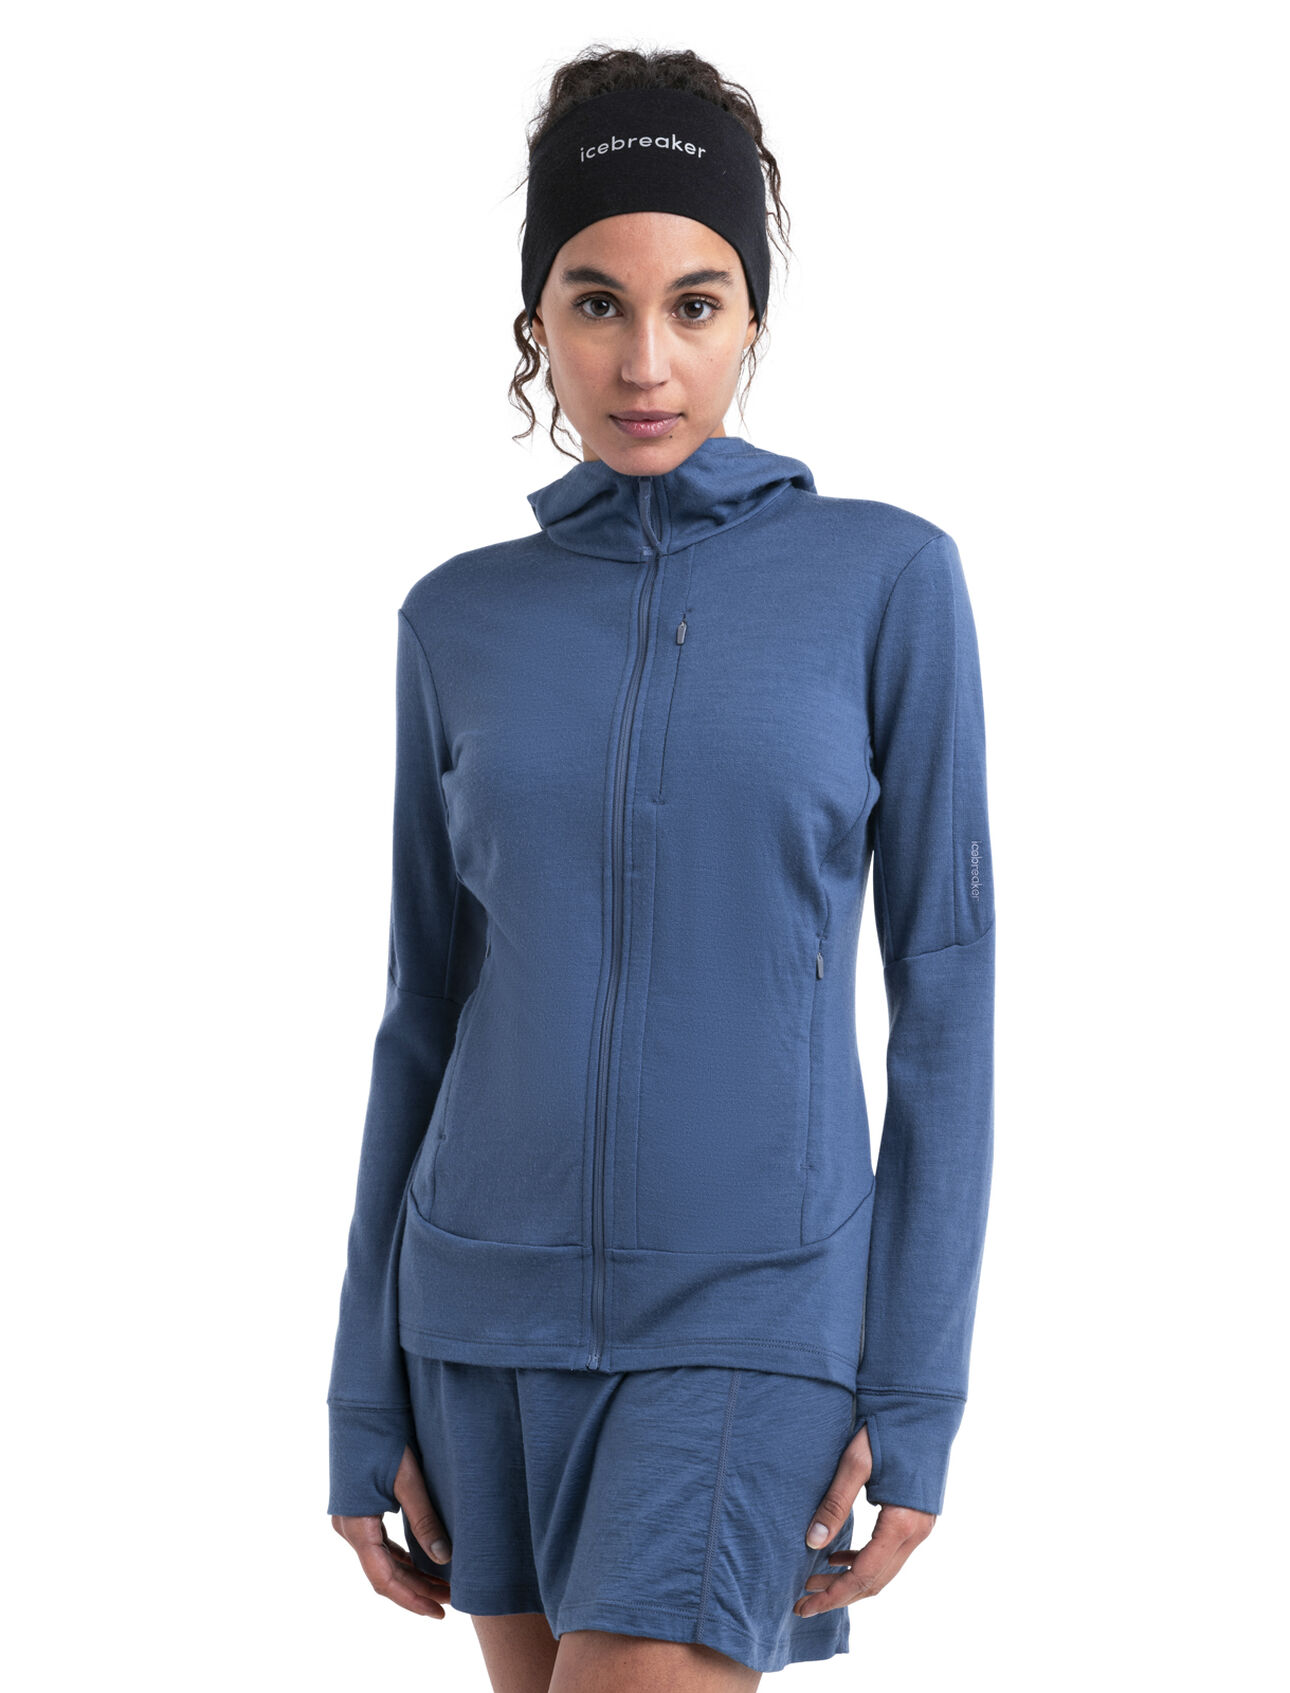 Womens Merino 260 Quantum IV Long Sleeve Zip Hoodie A slim-fit mid layer that’s ideal for technical mountain adventures like hiking, skiing and climbing, the Merino 260 Quantum IV Long Sleeve Zip Hoodie naturally resists odours and helps regulate your body temperature thanks to its 100% merino wool fabric.